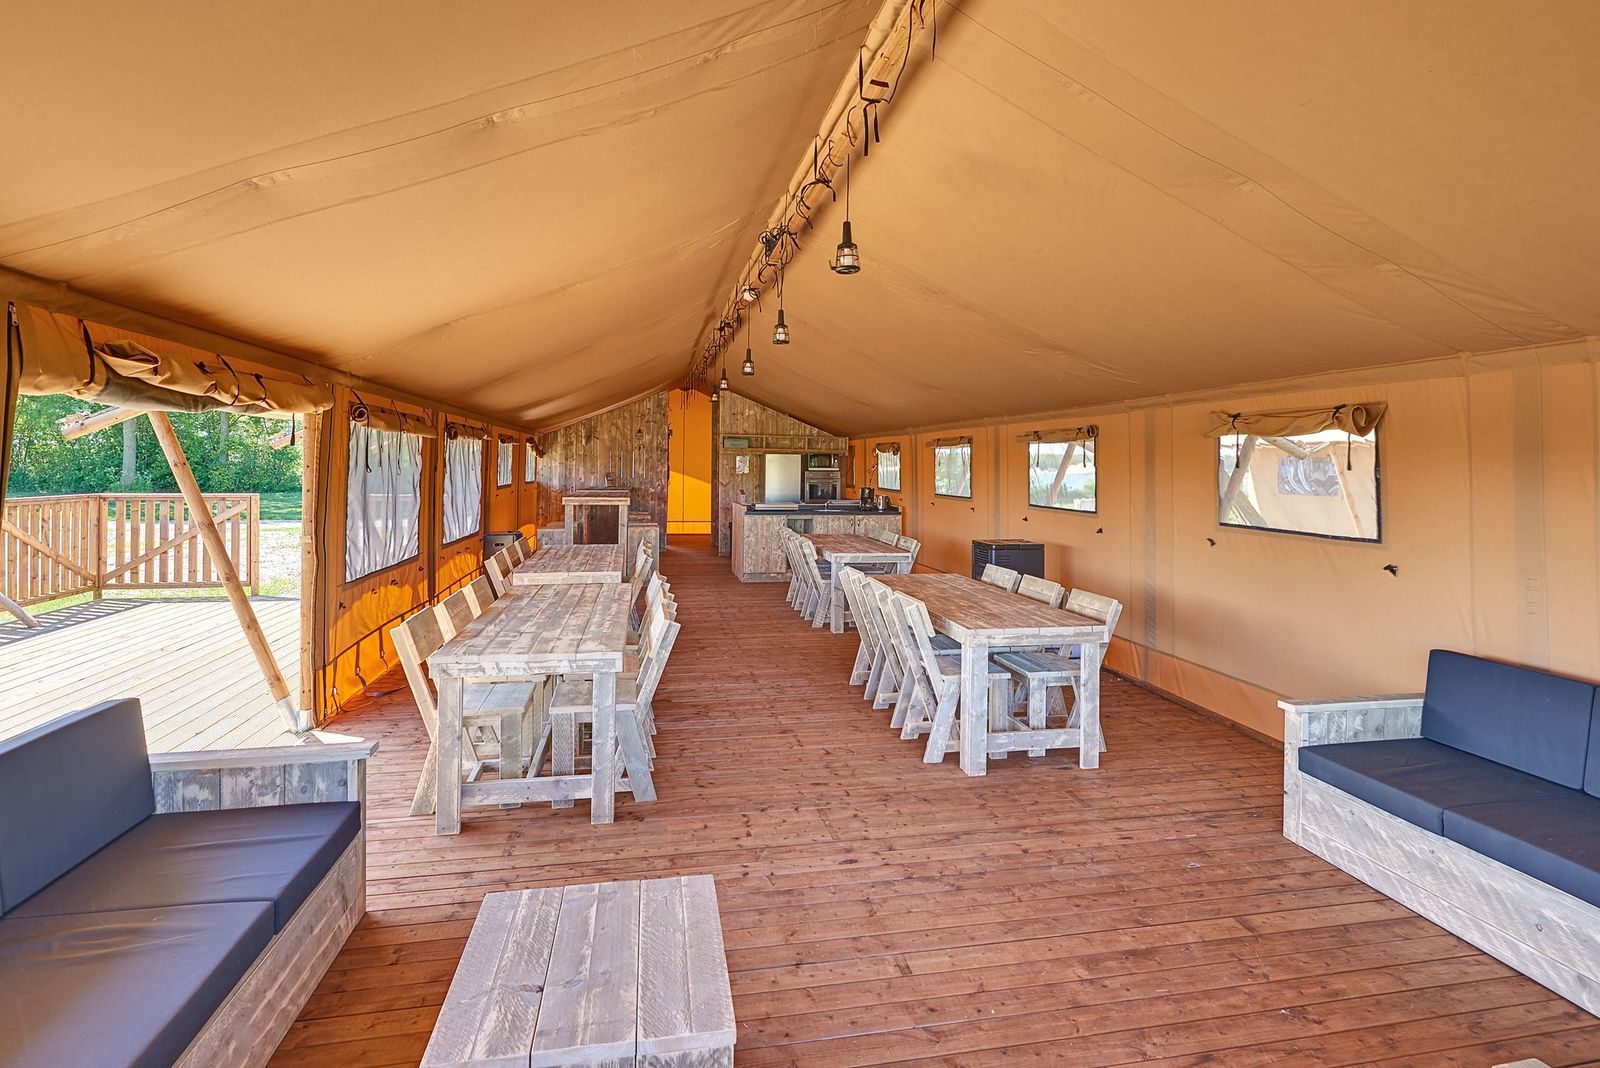 Group accommodation: group tent + four 6-person luxury glamping tents (24 people)